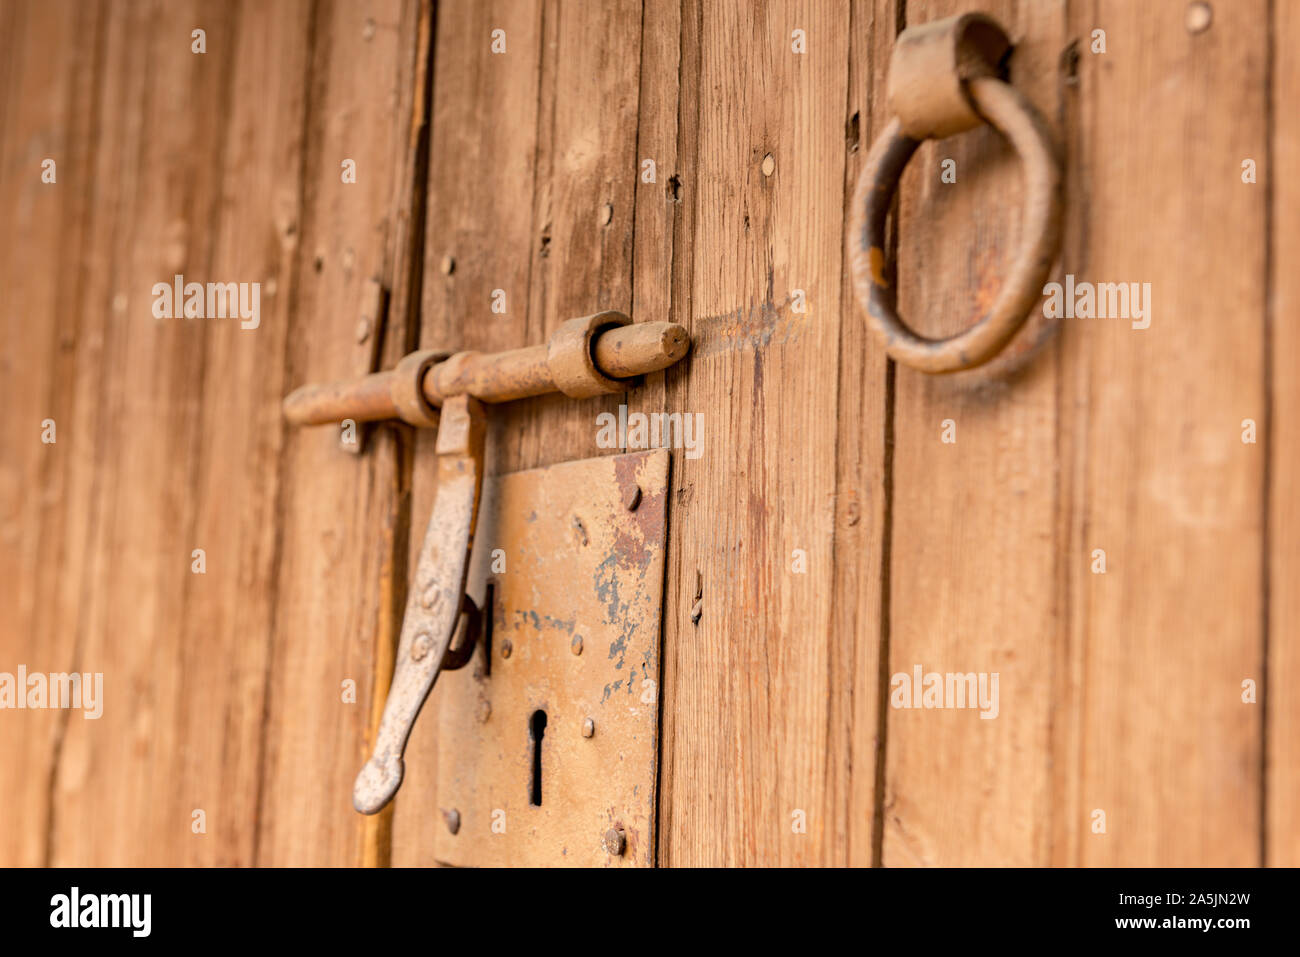 Ood Old Door With Round Metal Knobs For Exterior Design Antique And Grunge Style Brown Wooden Surface Door Photography Image Stock Photo Alamy